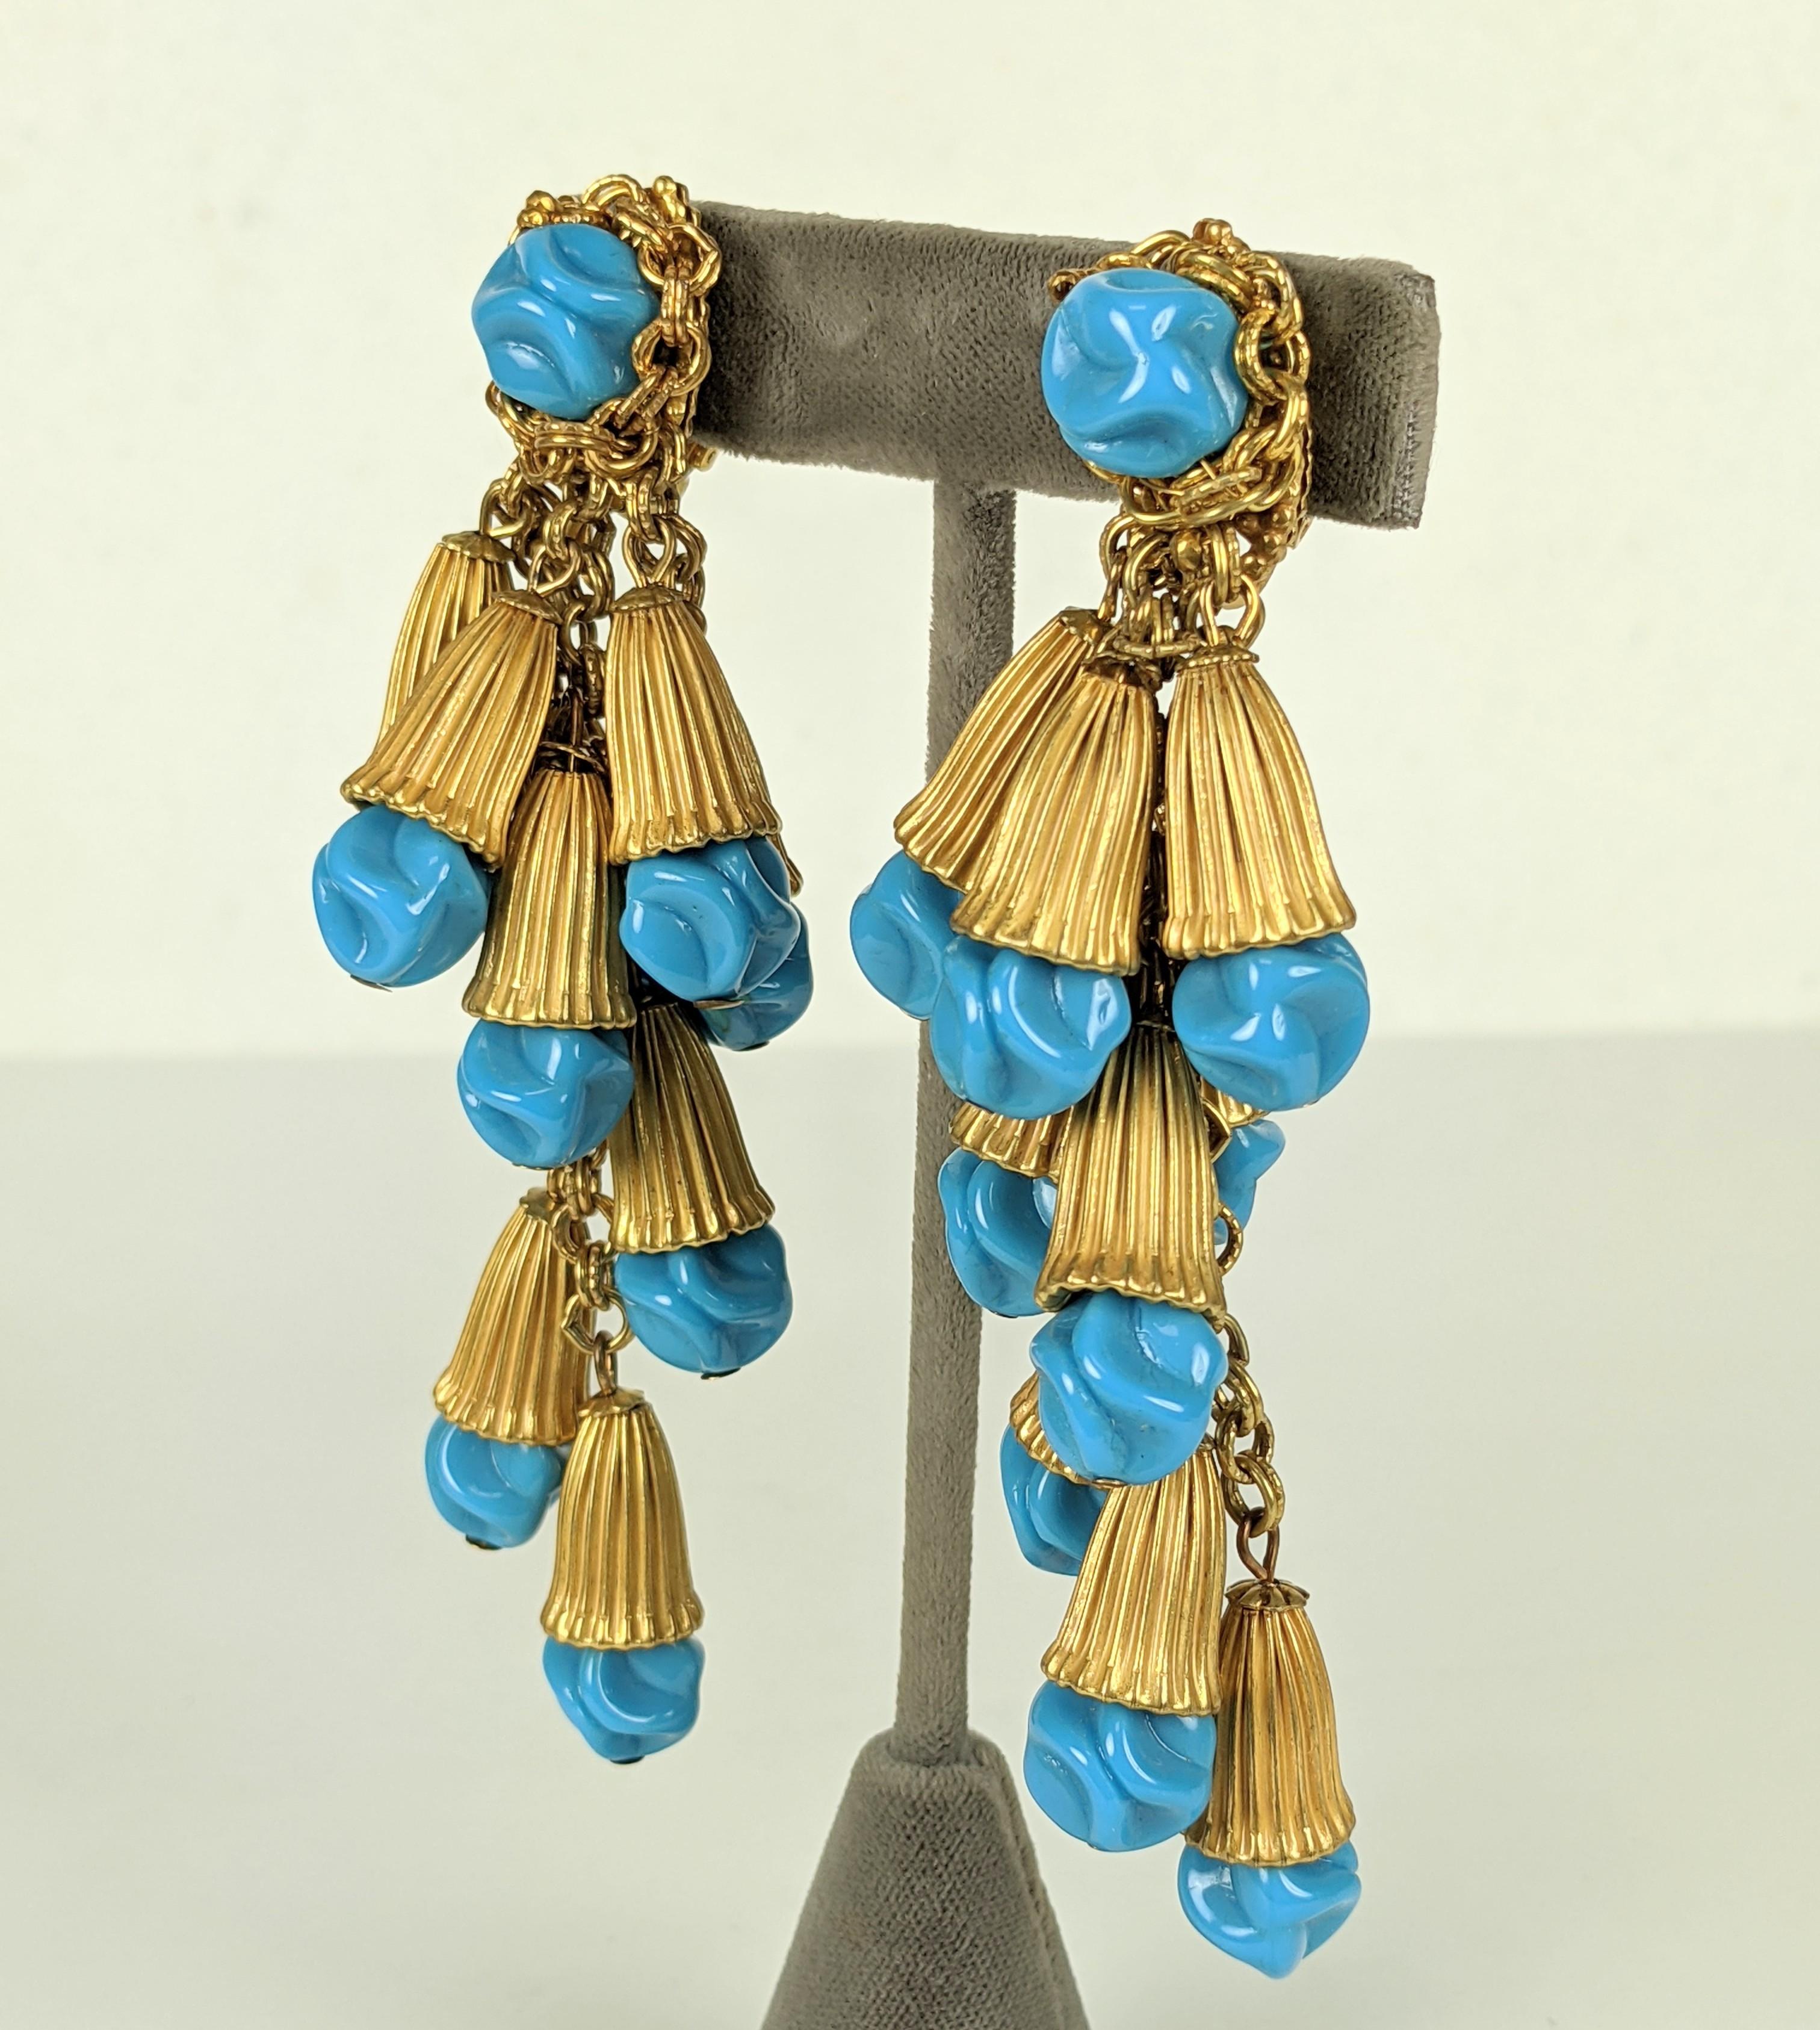 Large and impressive Miriam Haskell Ribbed Gold and Turquoise Pate de Verre ribbed bellflower earrings. Chain is used to decorate a hand made turquoise pate de verre bead which drops down to series of bellflower drops. Lovely signature Russian gold